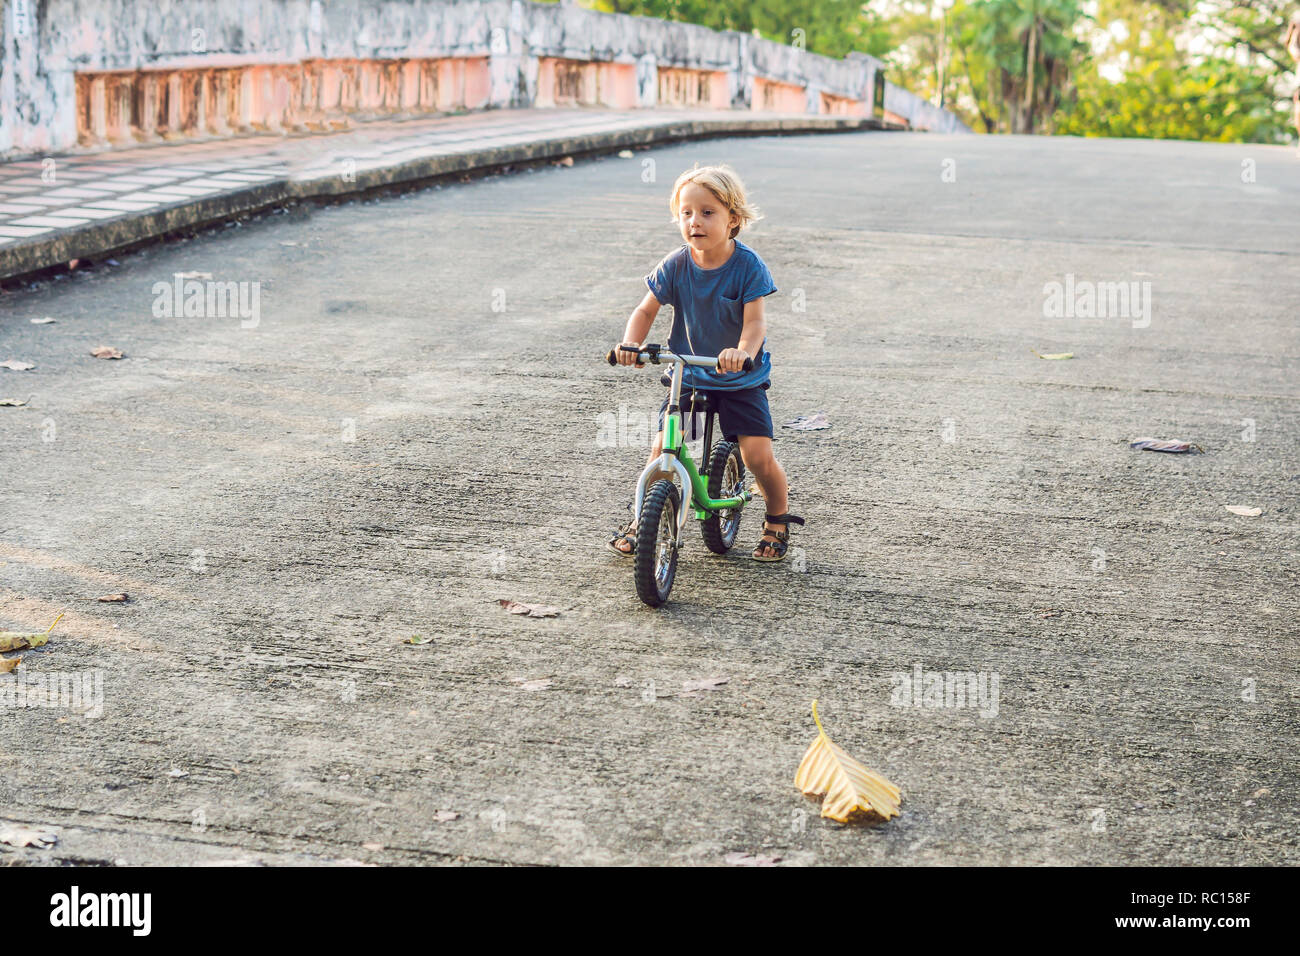 Little boy on a bicycle. Caught in motion, on a driveway motion blurred. Preschool child's first day on the bike. The joy of movement. Little athlete learns to keep balance while riding a bicycle Stock Photo